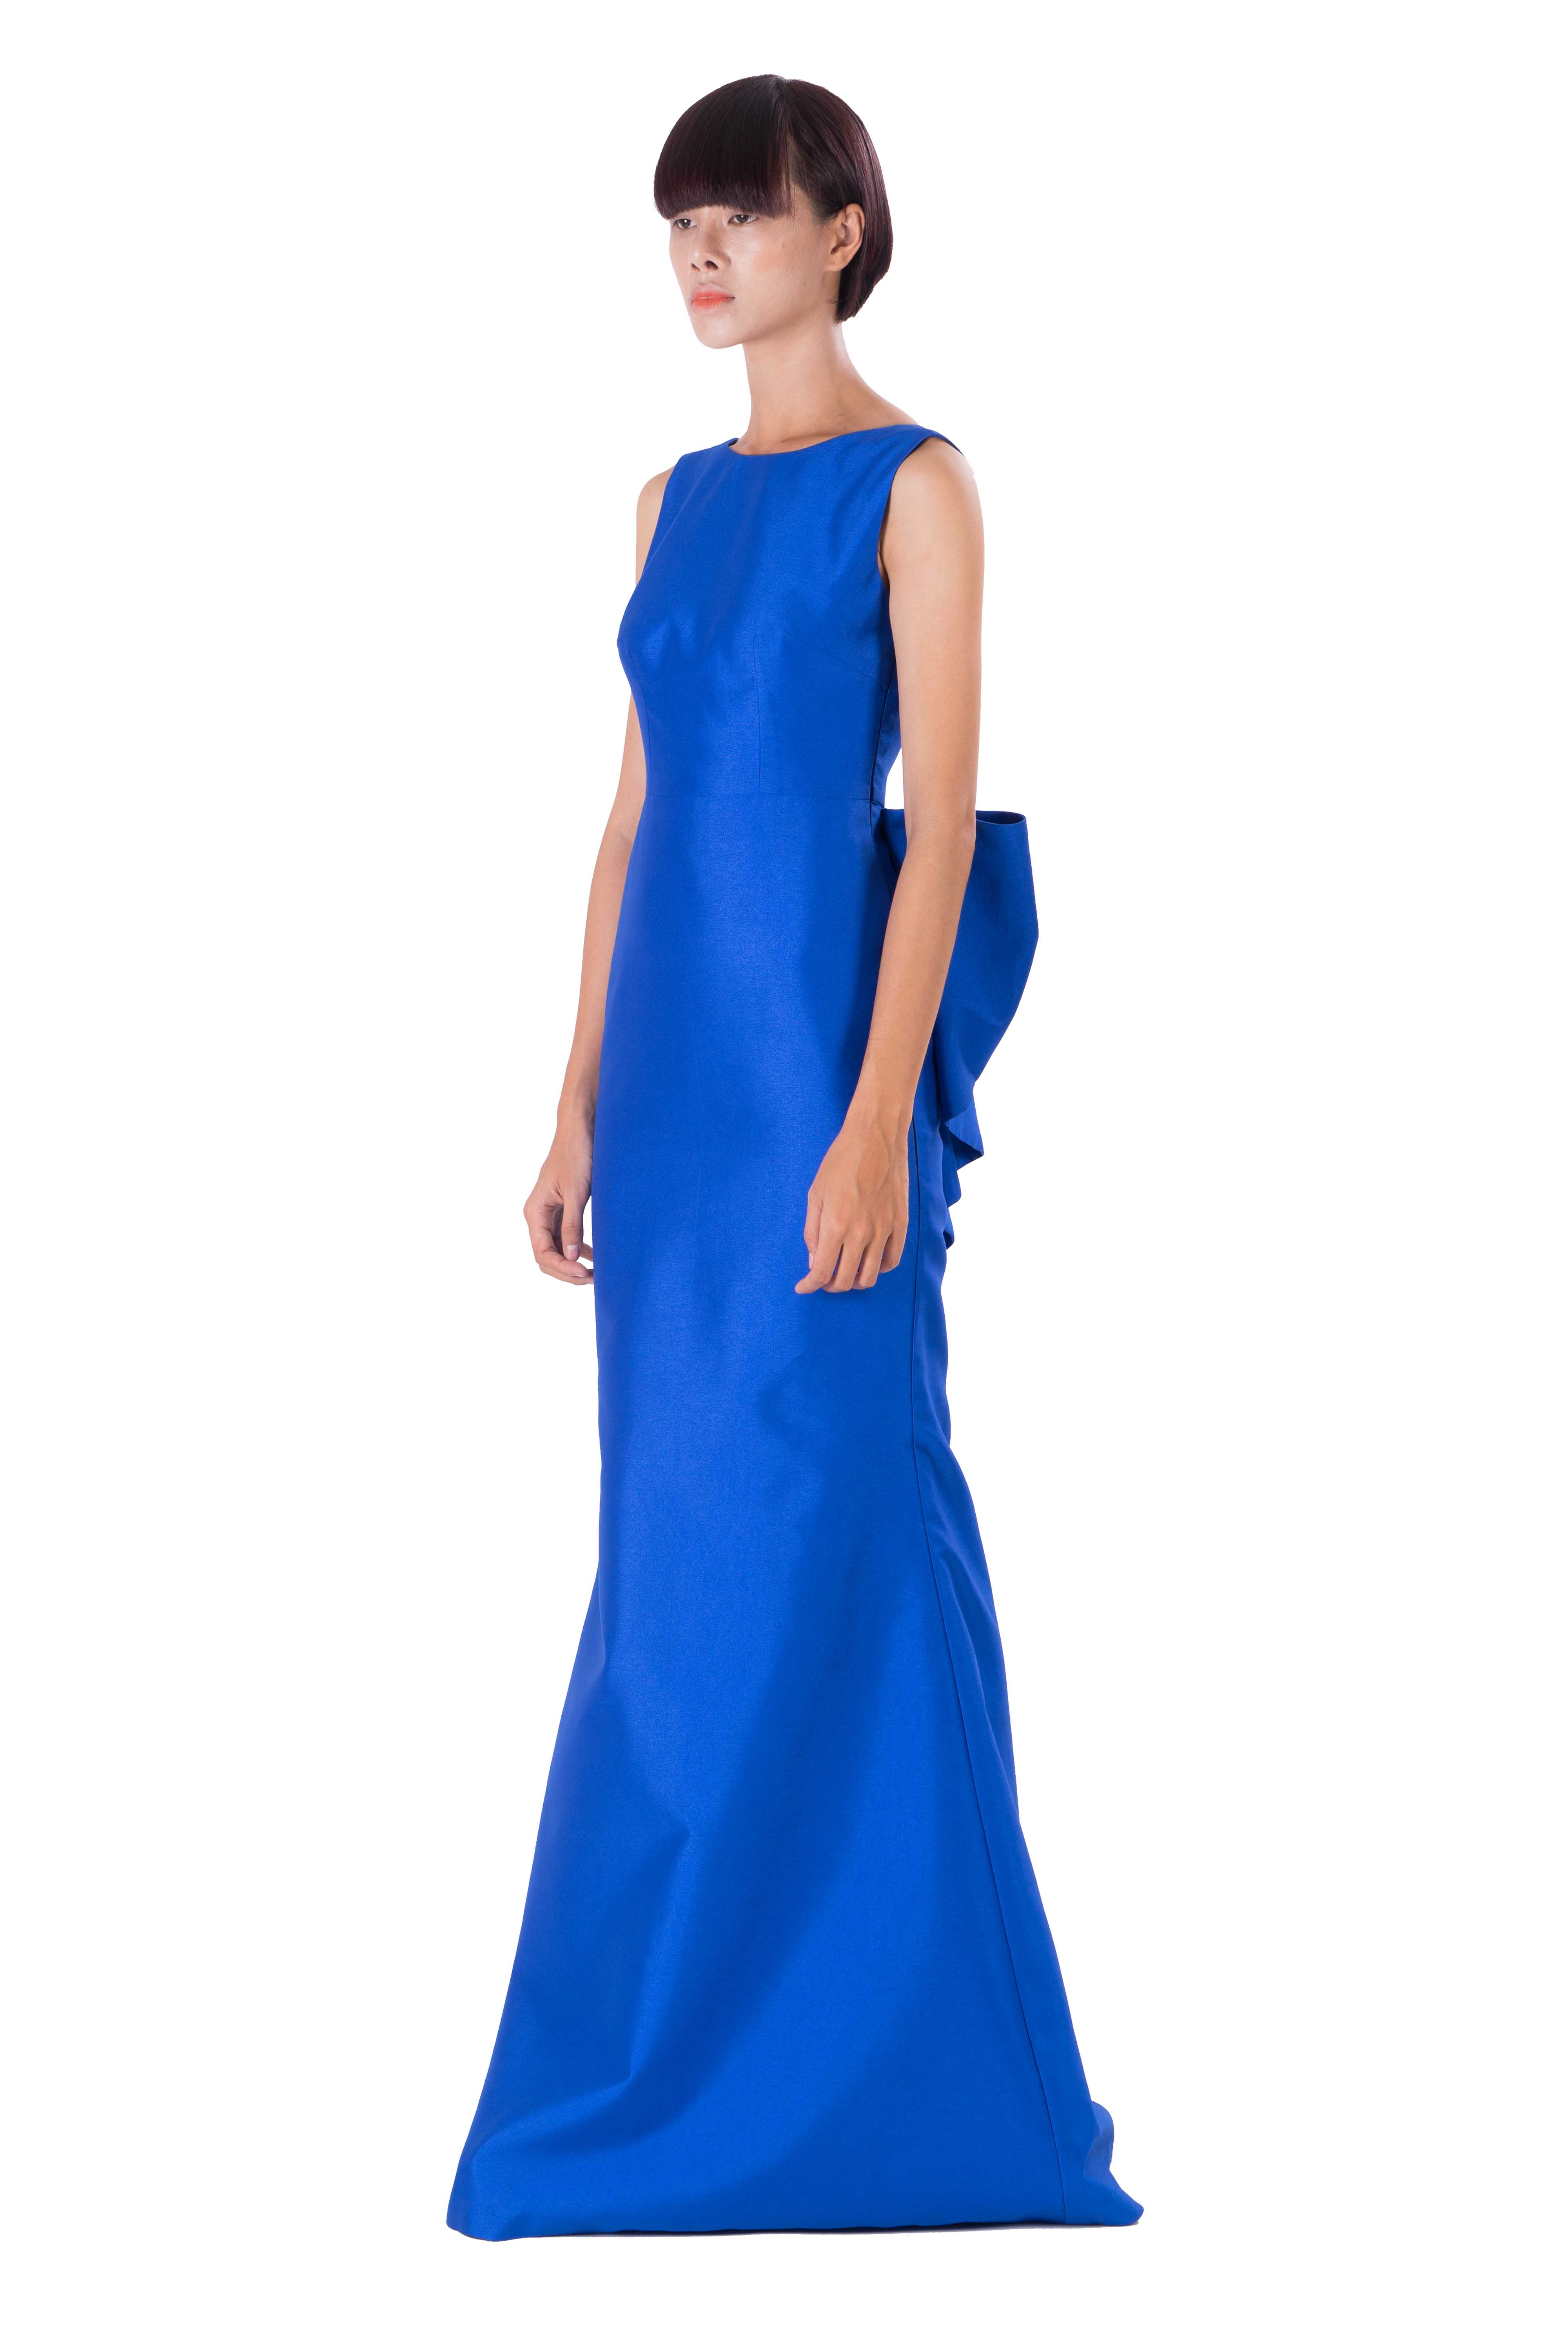 Blue evening dress with big bow at back